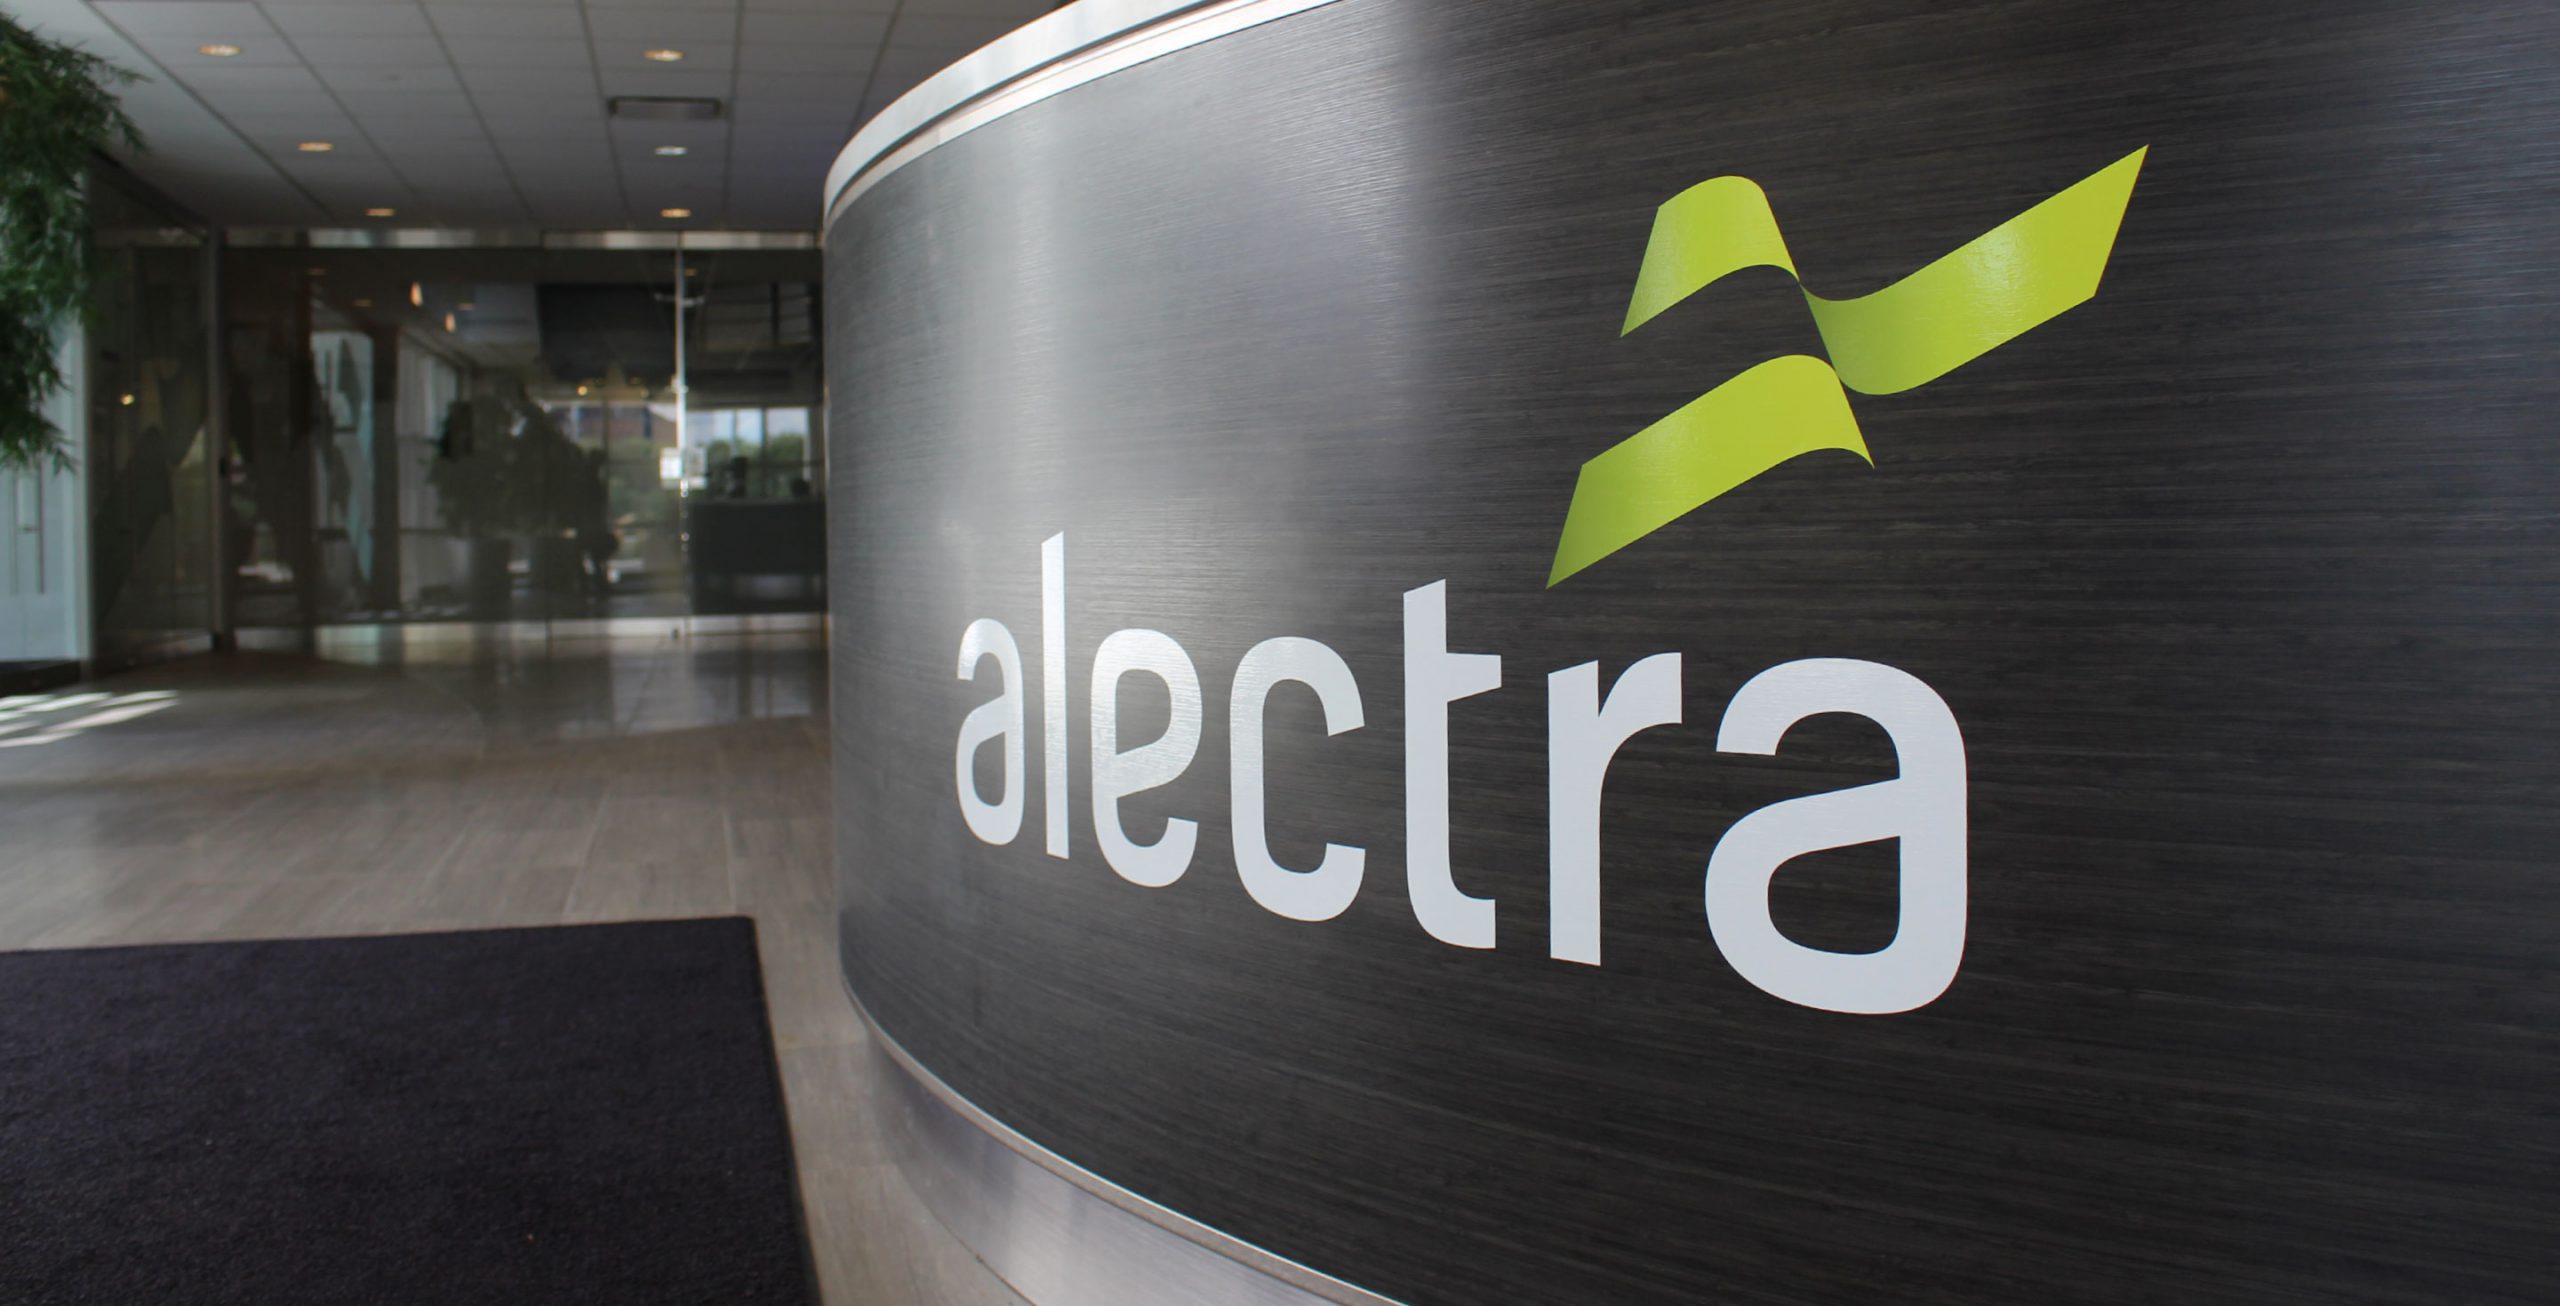 The Alectra logo is featured on an curved metal interior application.